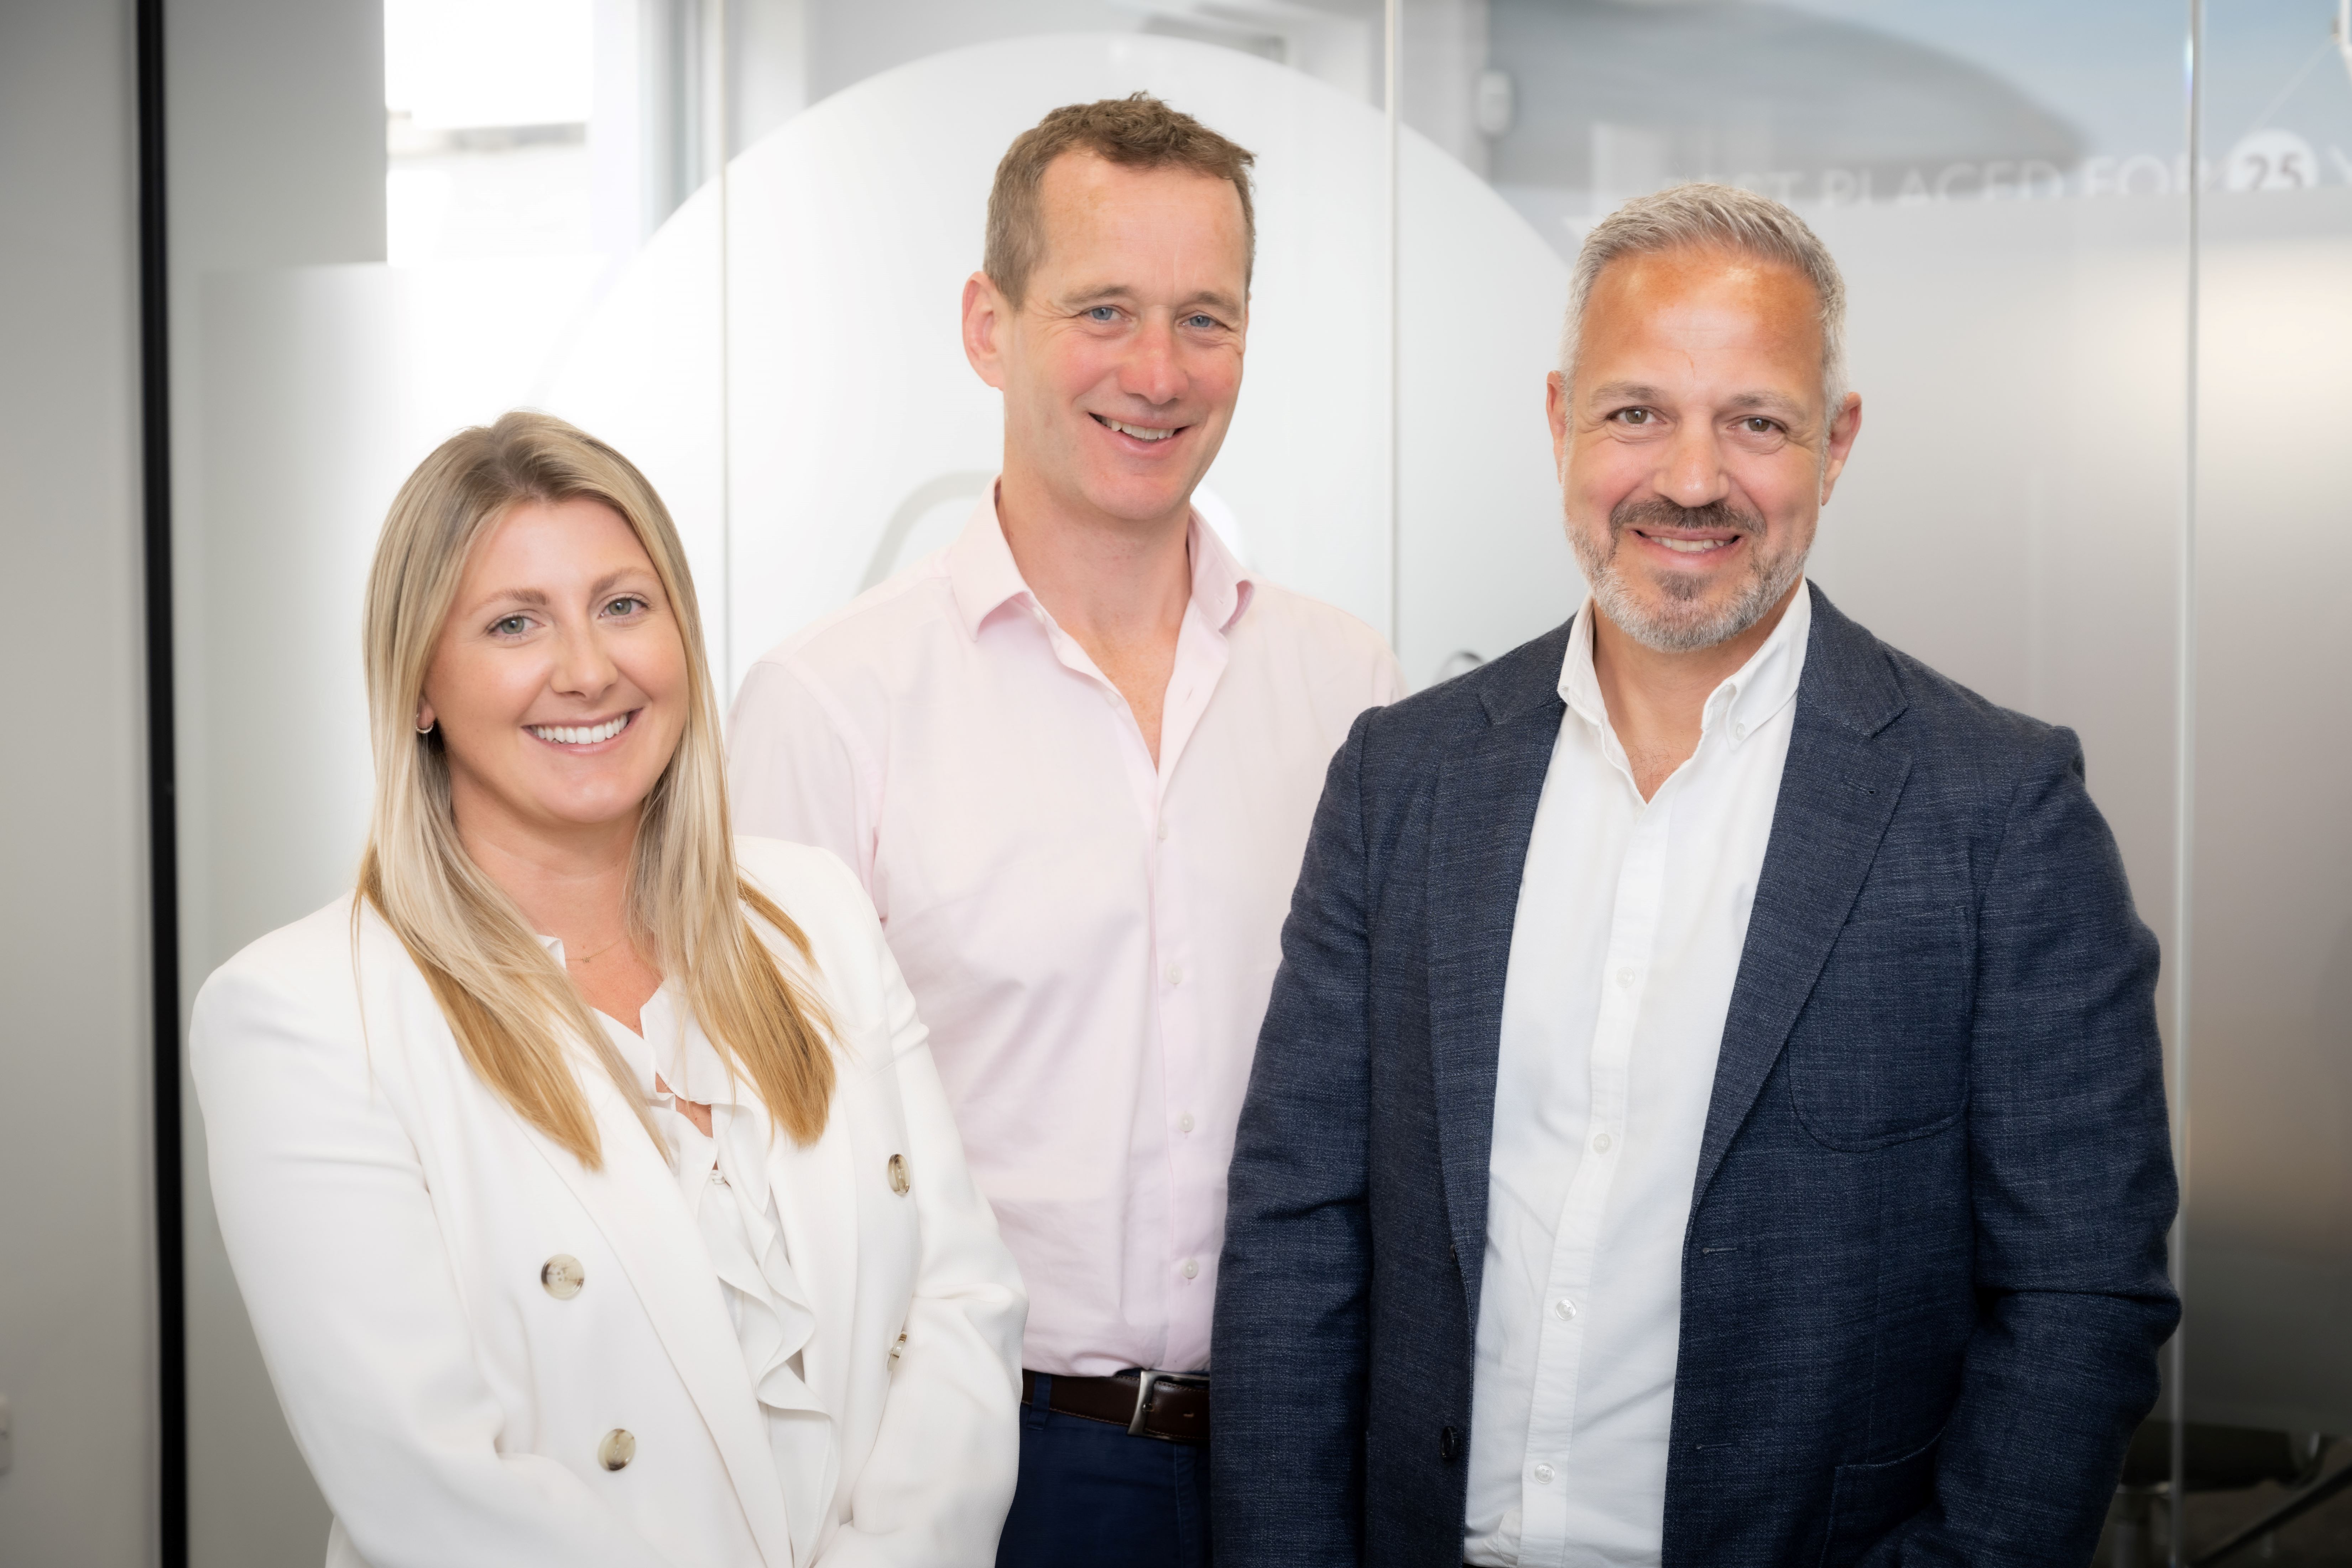 Chancerygate appoints two new board members